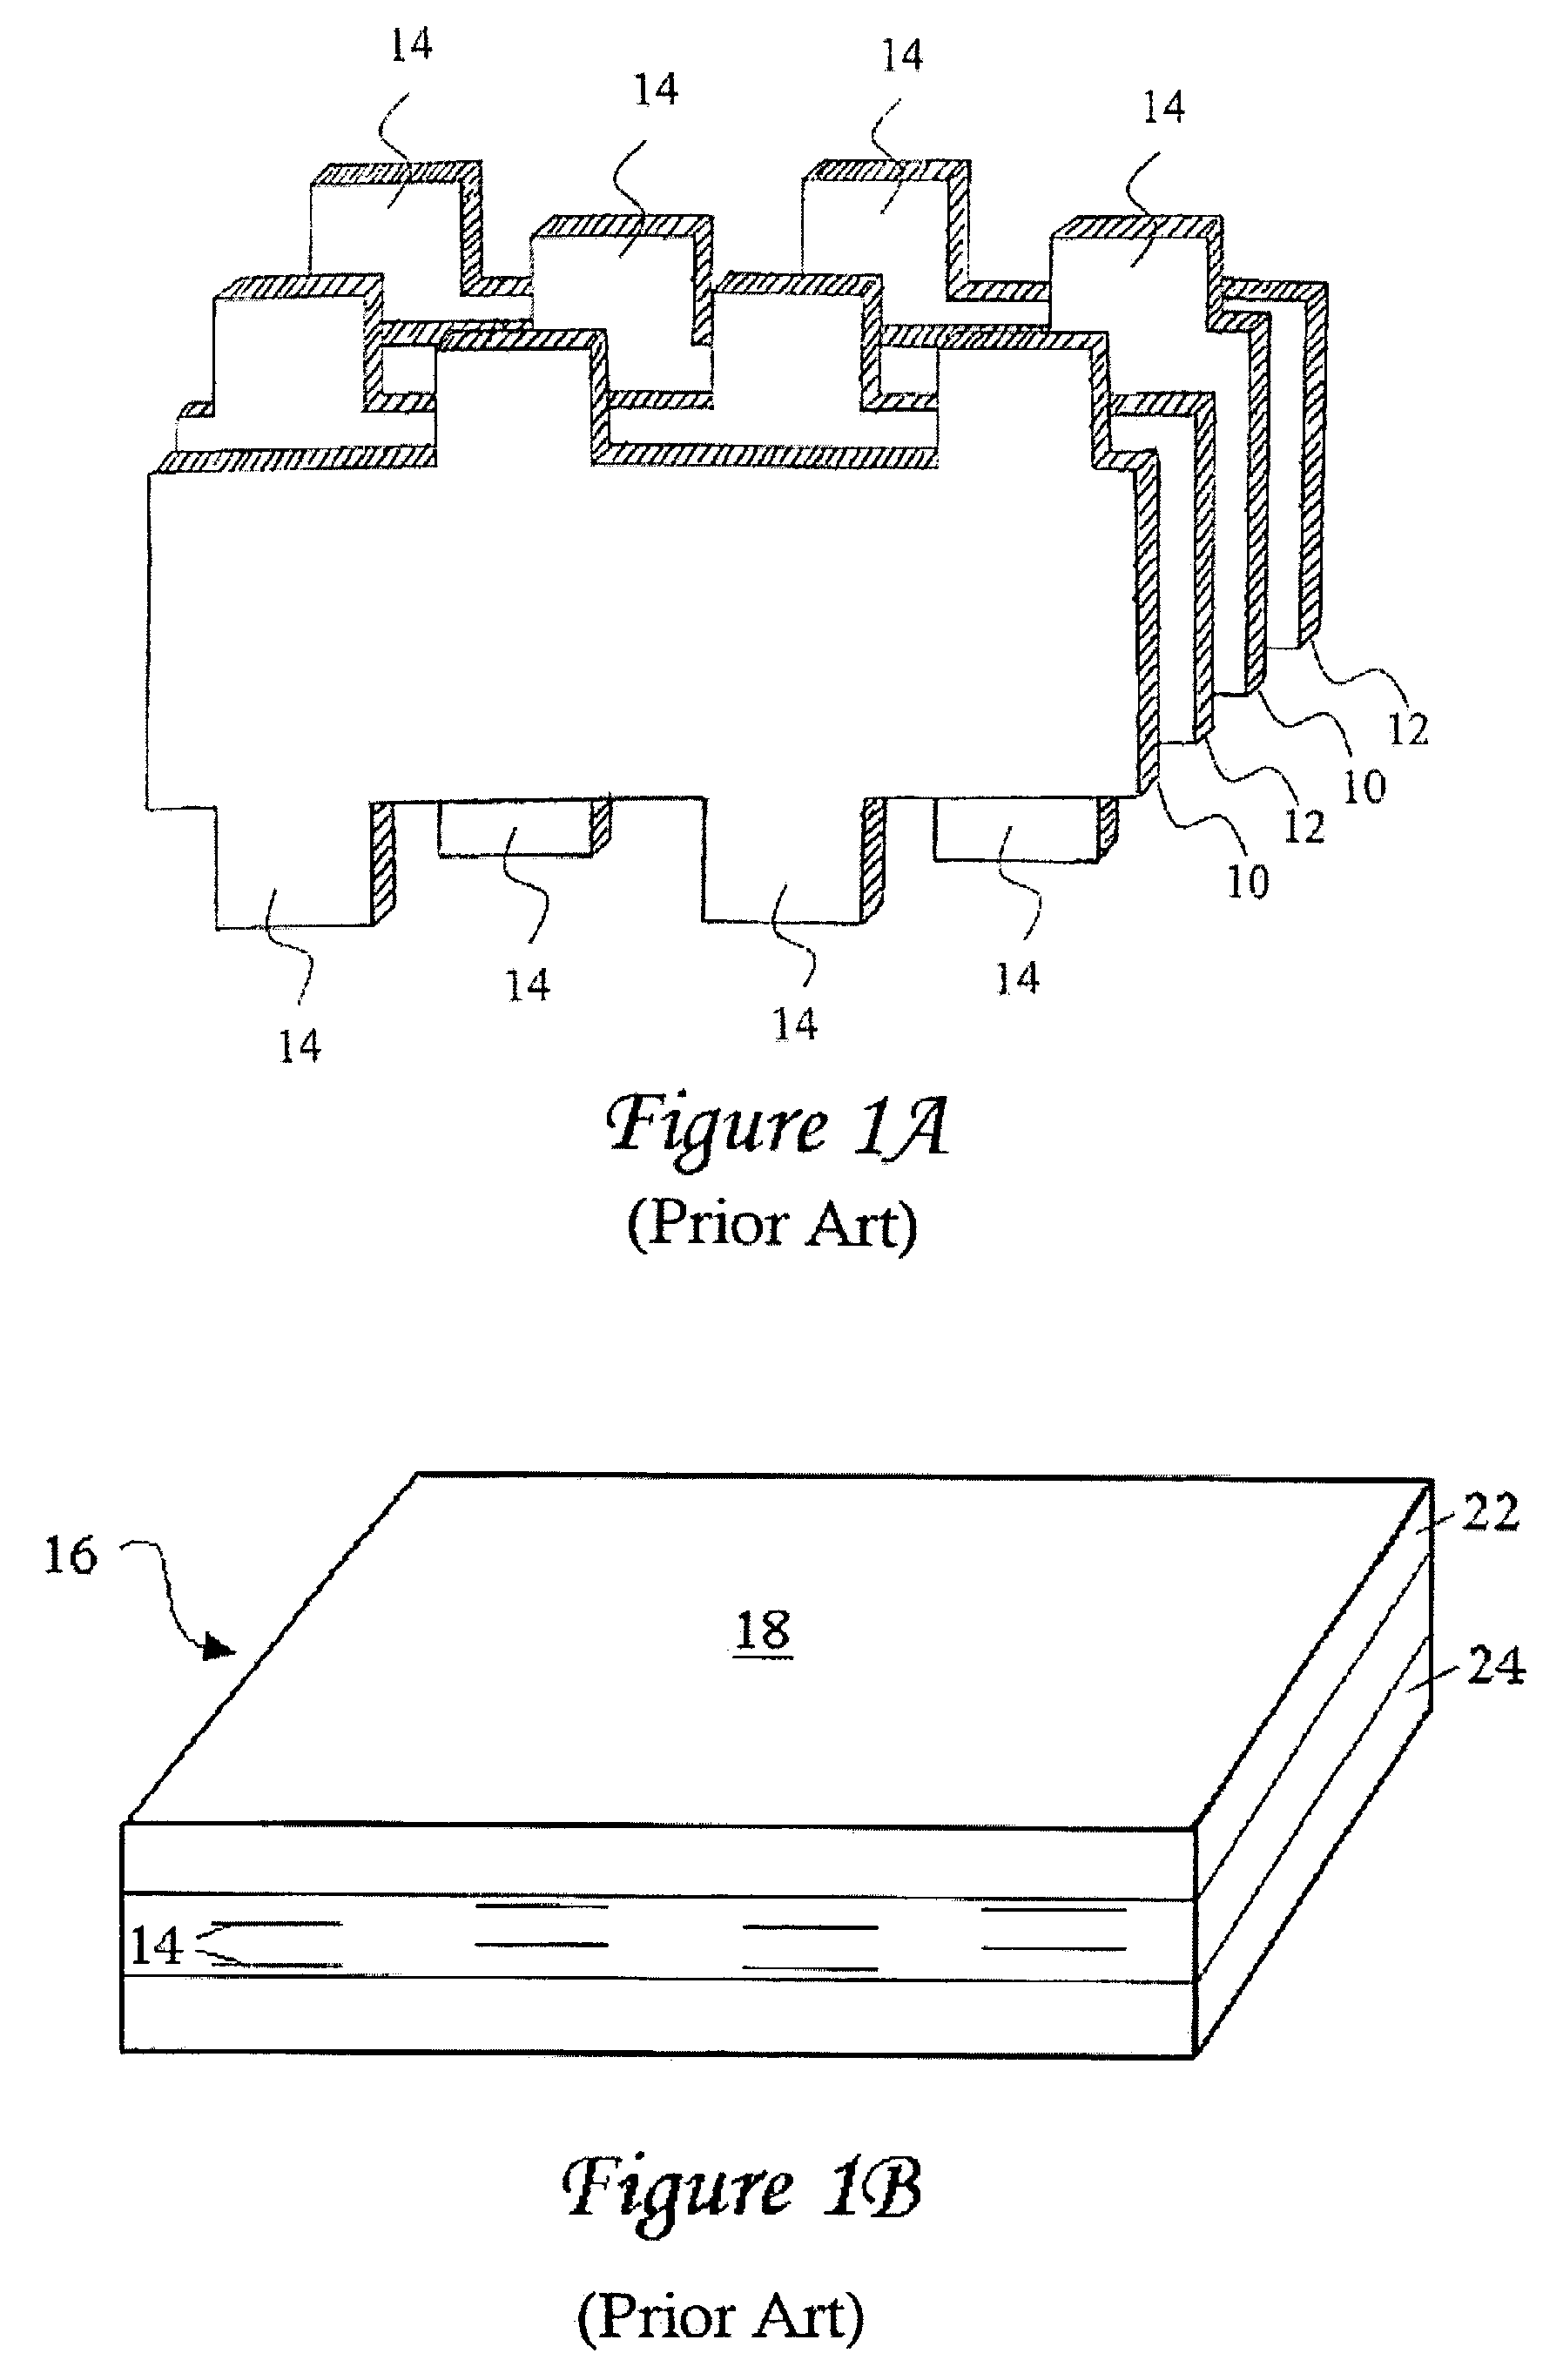 Method for forming plated terminations